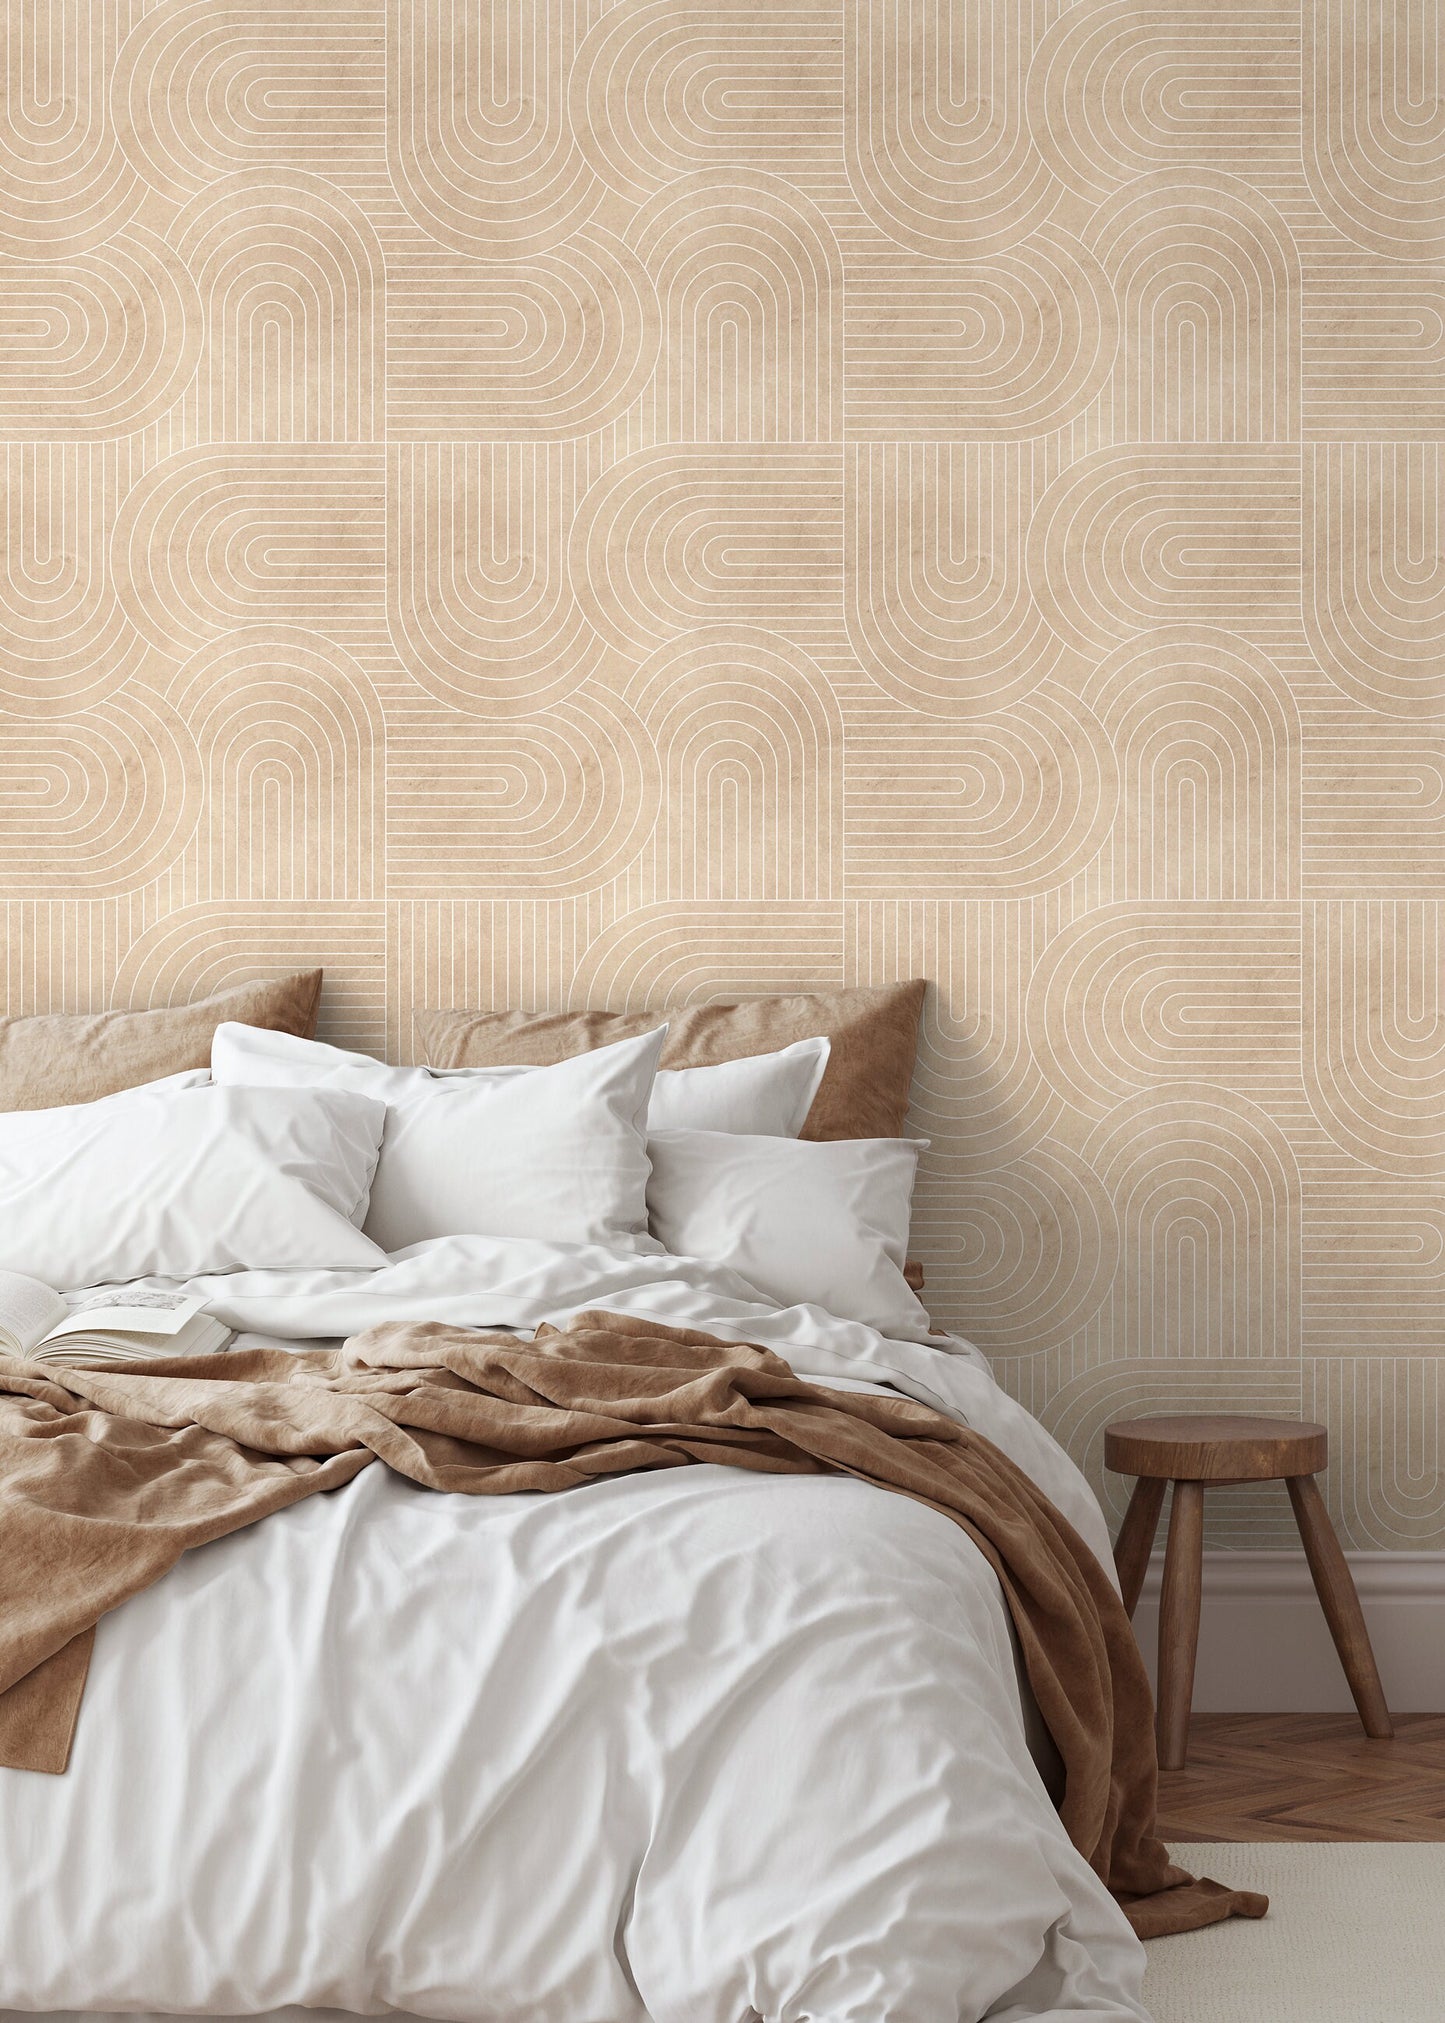 Gold Abstract Line Wallpaper / Peel and Stick Wallpaper Removable Wallpaper Home Decor Wall Art Wall Decor Room Decor - C847